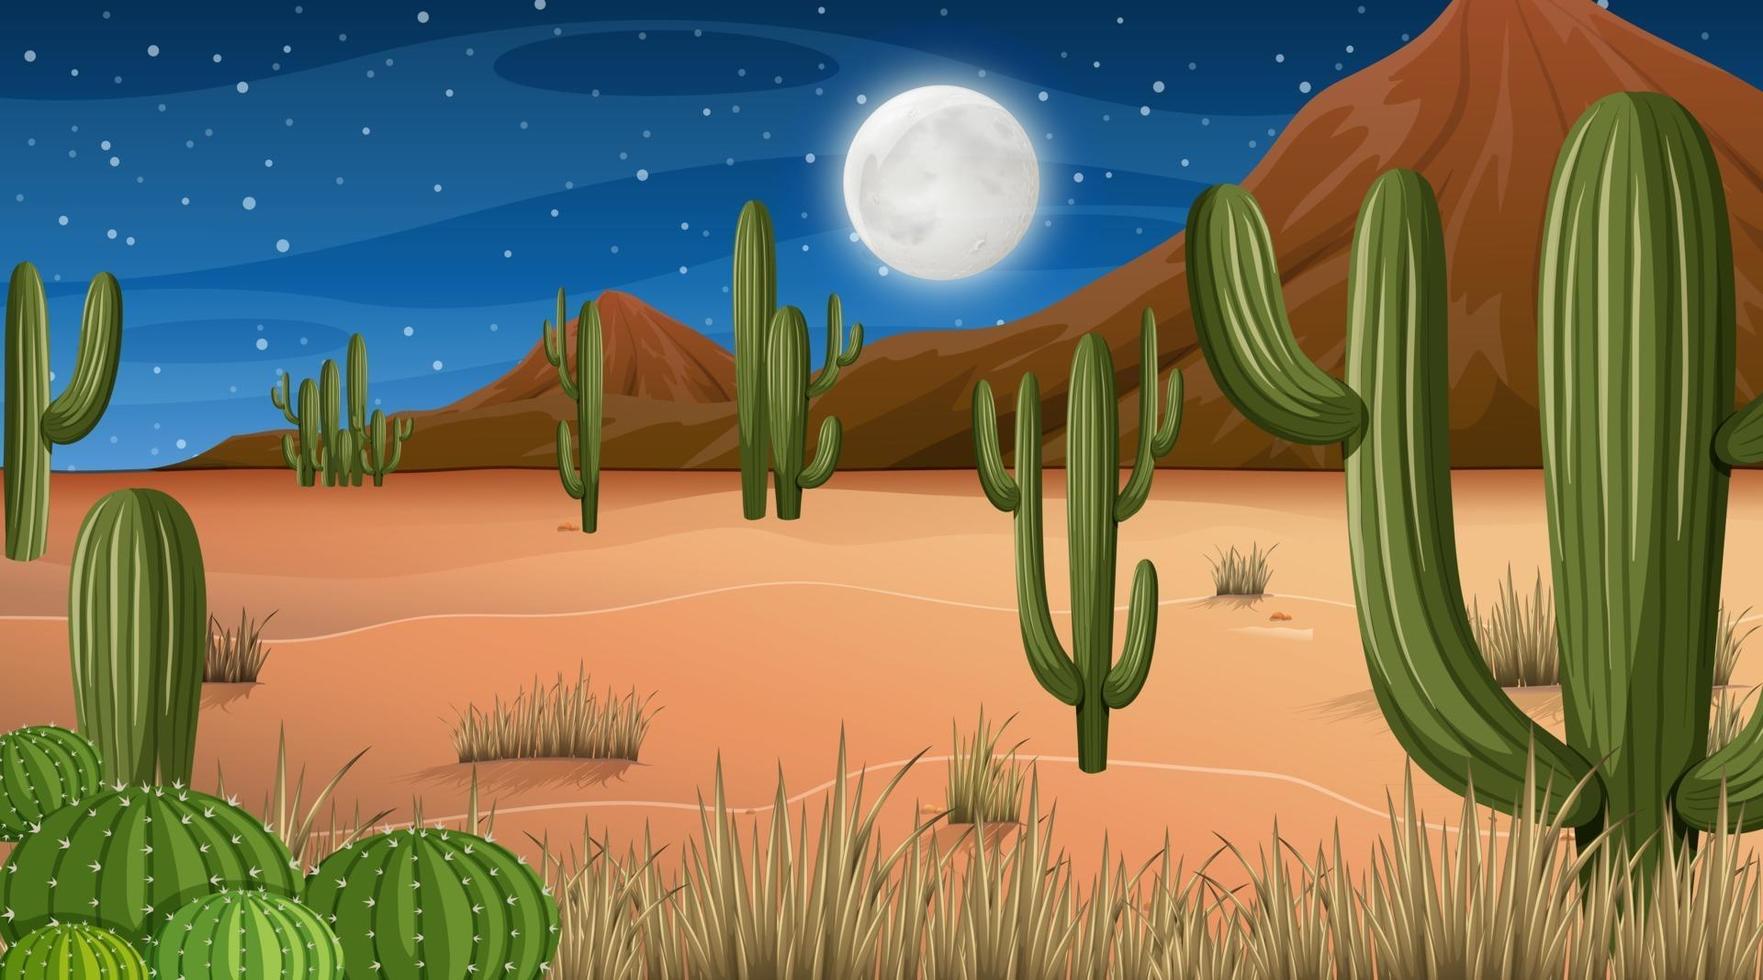 Desert forest landscape at night scene with many cactus vector